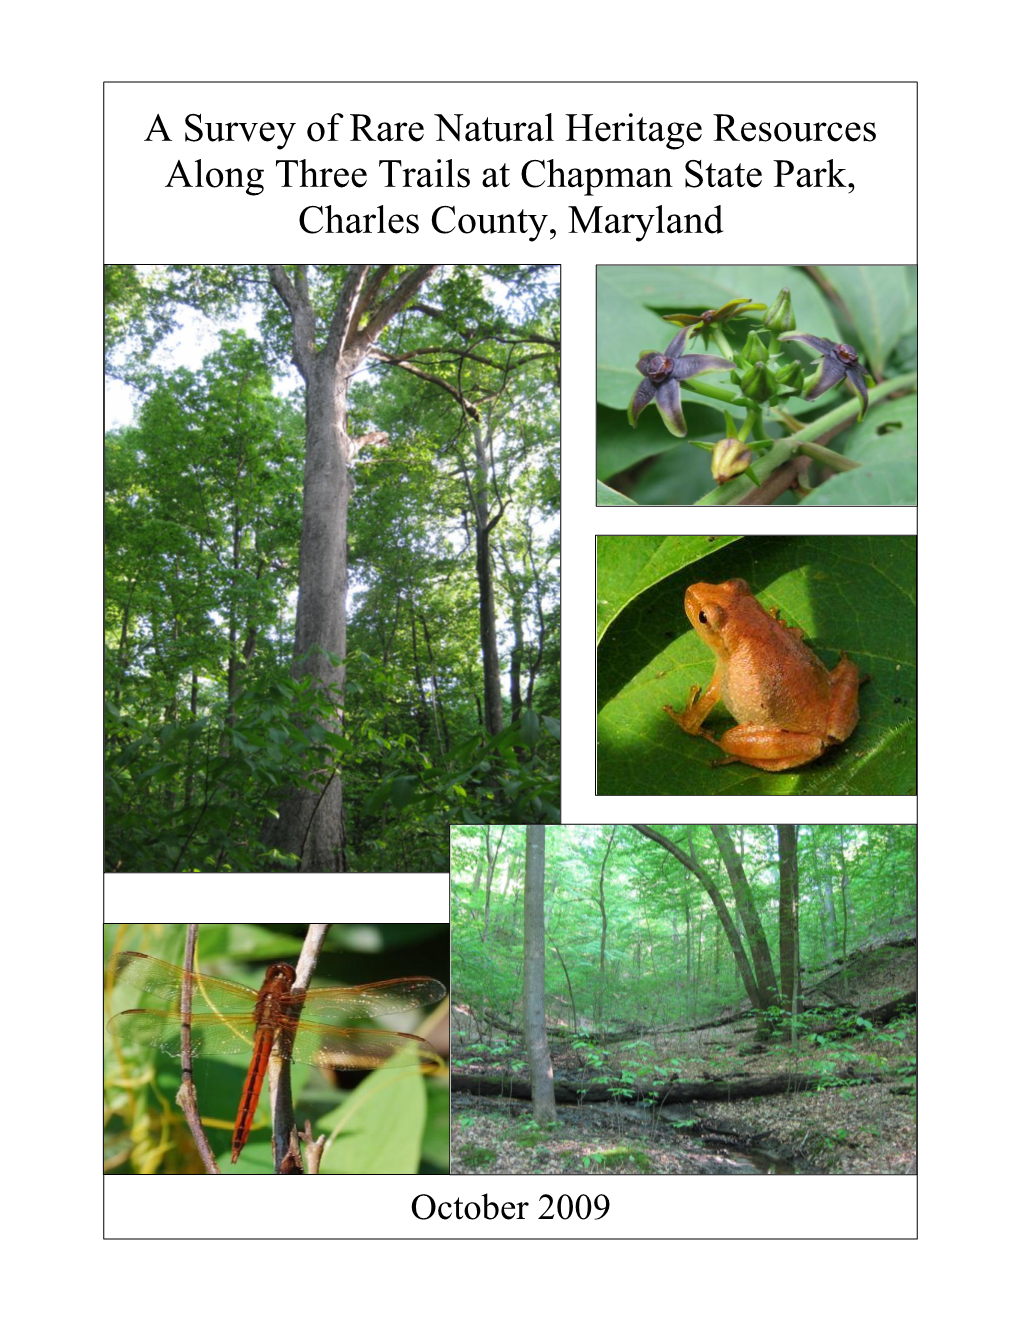 A Survey of Rare Natural Heritage Resources Along Three Trails at Chapman State Park, Charles County, Maryland